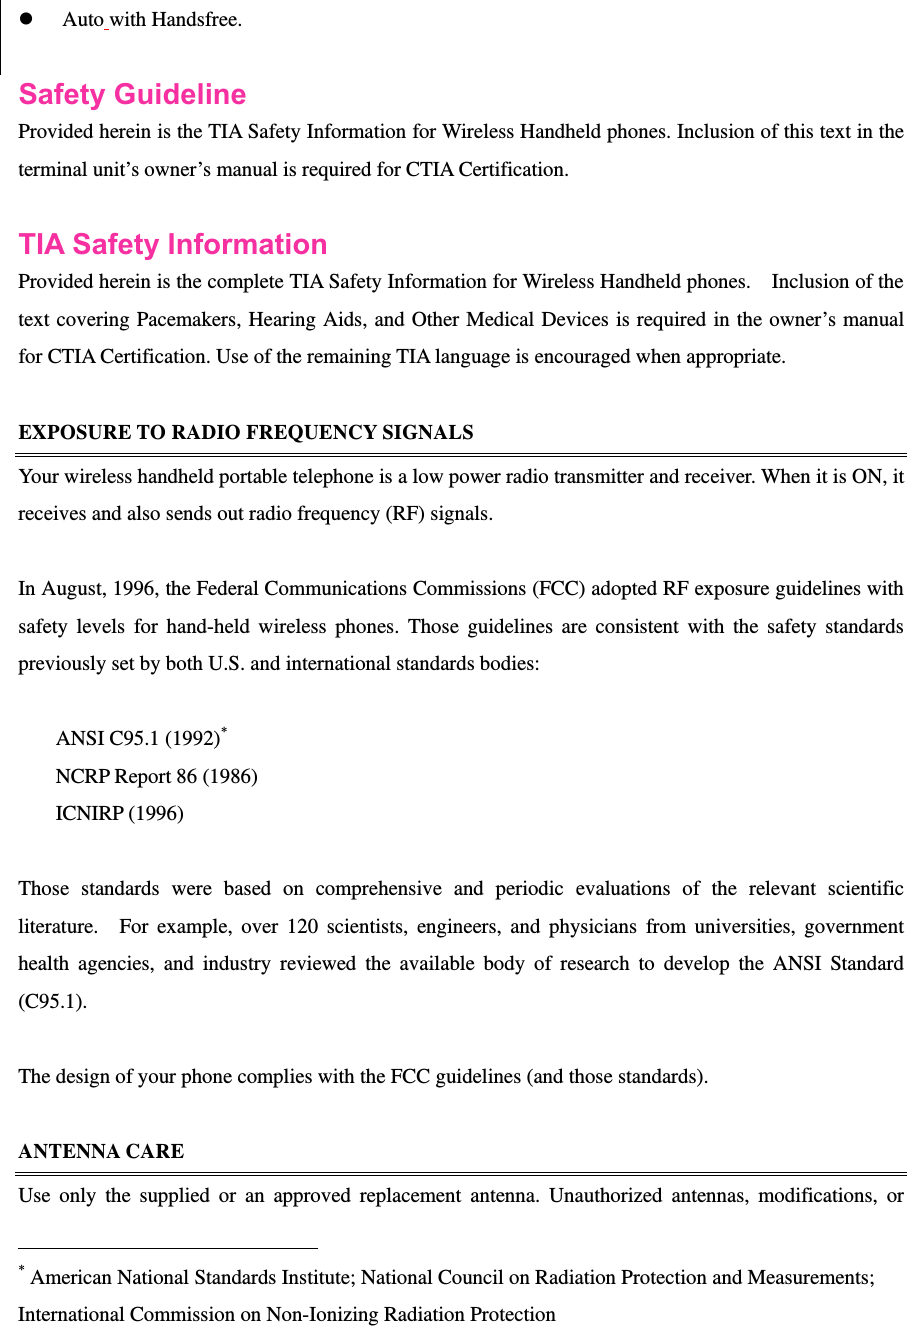   z Auto with Handsfree.  Safety Guideline Provided herein is the TIA Safety Information for Wireless Handheld phones. Inclusion of this text in the terminal unit’s owner’s manual is required for CTIA Certification.  TIA Safety Information   Provided herein is the complete TIA Safety Information for Wireless Handheld phones.    Inclusion of the text covering Pacemakers, Hearing Aids, and Other Medical Devices is required in the owner’s manual for CTIA Certification. Use of the remaining TIA language is encouraged when appropriate.  EXPOSURE TO RADIO FREQUENCY SIGNALS Your wireless handheld portable telephone is a low power radio transmitter and receiver. When it is ON, it receives and also sends out radio frequency (RF) signals.  In August, 1996, the Federal Communications Commissions (FCC) adopted RF exposure guidelines with safety levels for hand-held wireless phones. Those guidelines are consistent with the safety standards previously set by both U.S. and international standards bodies:  ANSI C95.1 (1992)* NCRP Report 86 (1986) ICNIRP (1996)  Those standards were based on comprehensive and periodic evaluations of the relevant scientific literature.  For example, over 120 scientists, engineers, and physicians from universities, government health agencies, and industry reviewed the available body of research to develop the ANSI Standard (C95.1).   The design of your phone complies with the FCC guidelines (and those standards).    ANTENNA CARE Use only the supplied or an approved replacement antenna. Unauthorized antennas, modifications, or                                                            * American National Standards Institute; National Council on Radiation Protection and Measurements; International Commission on Non-Ionizing Radiation Protection   